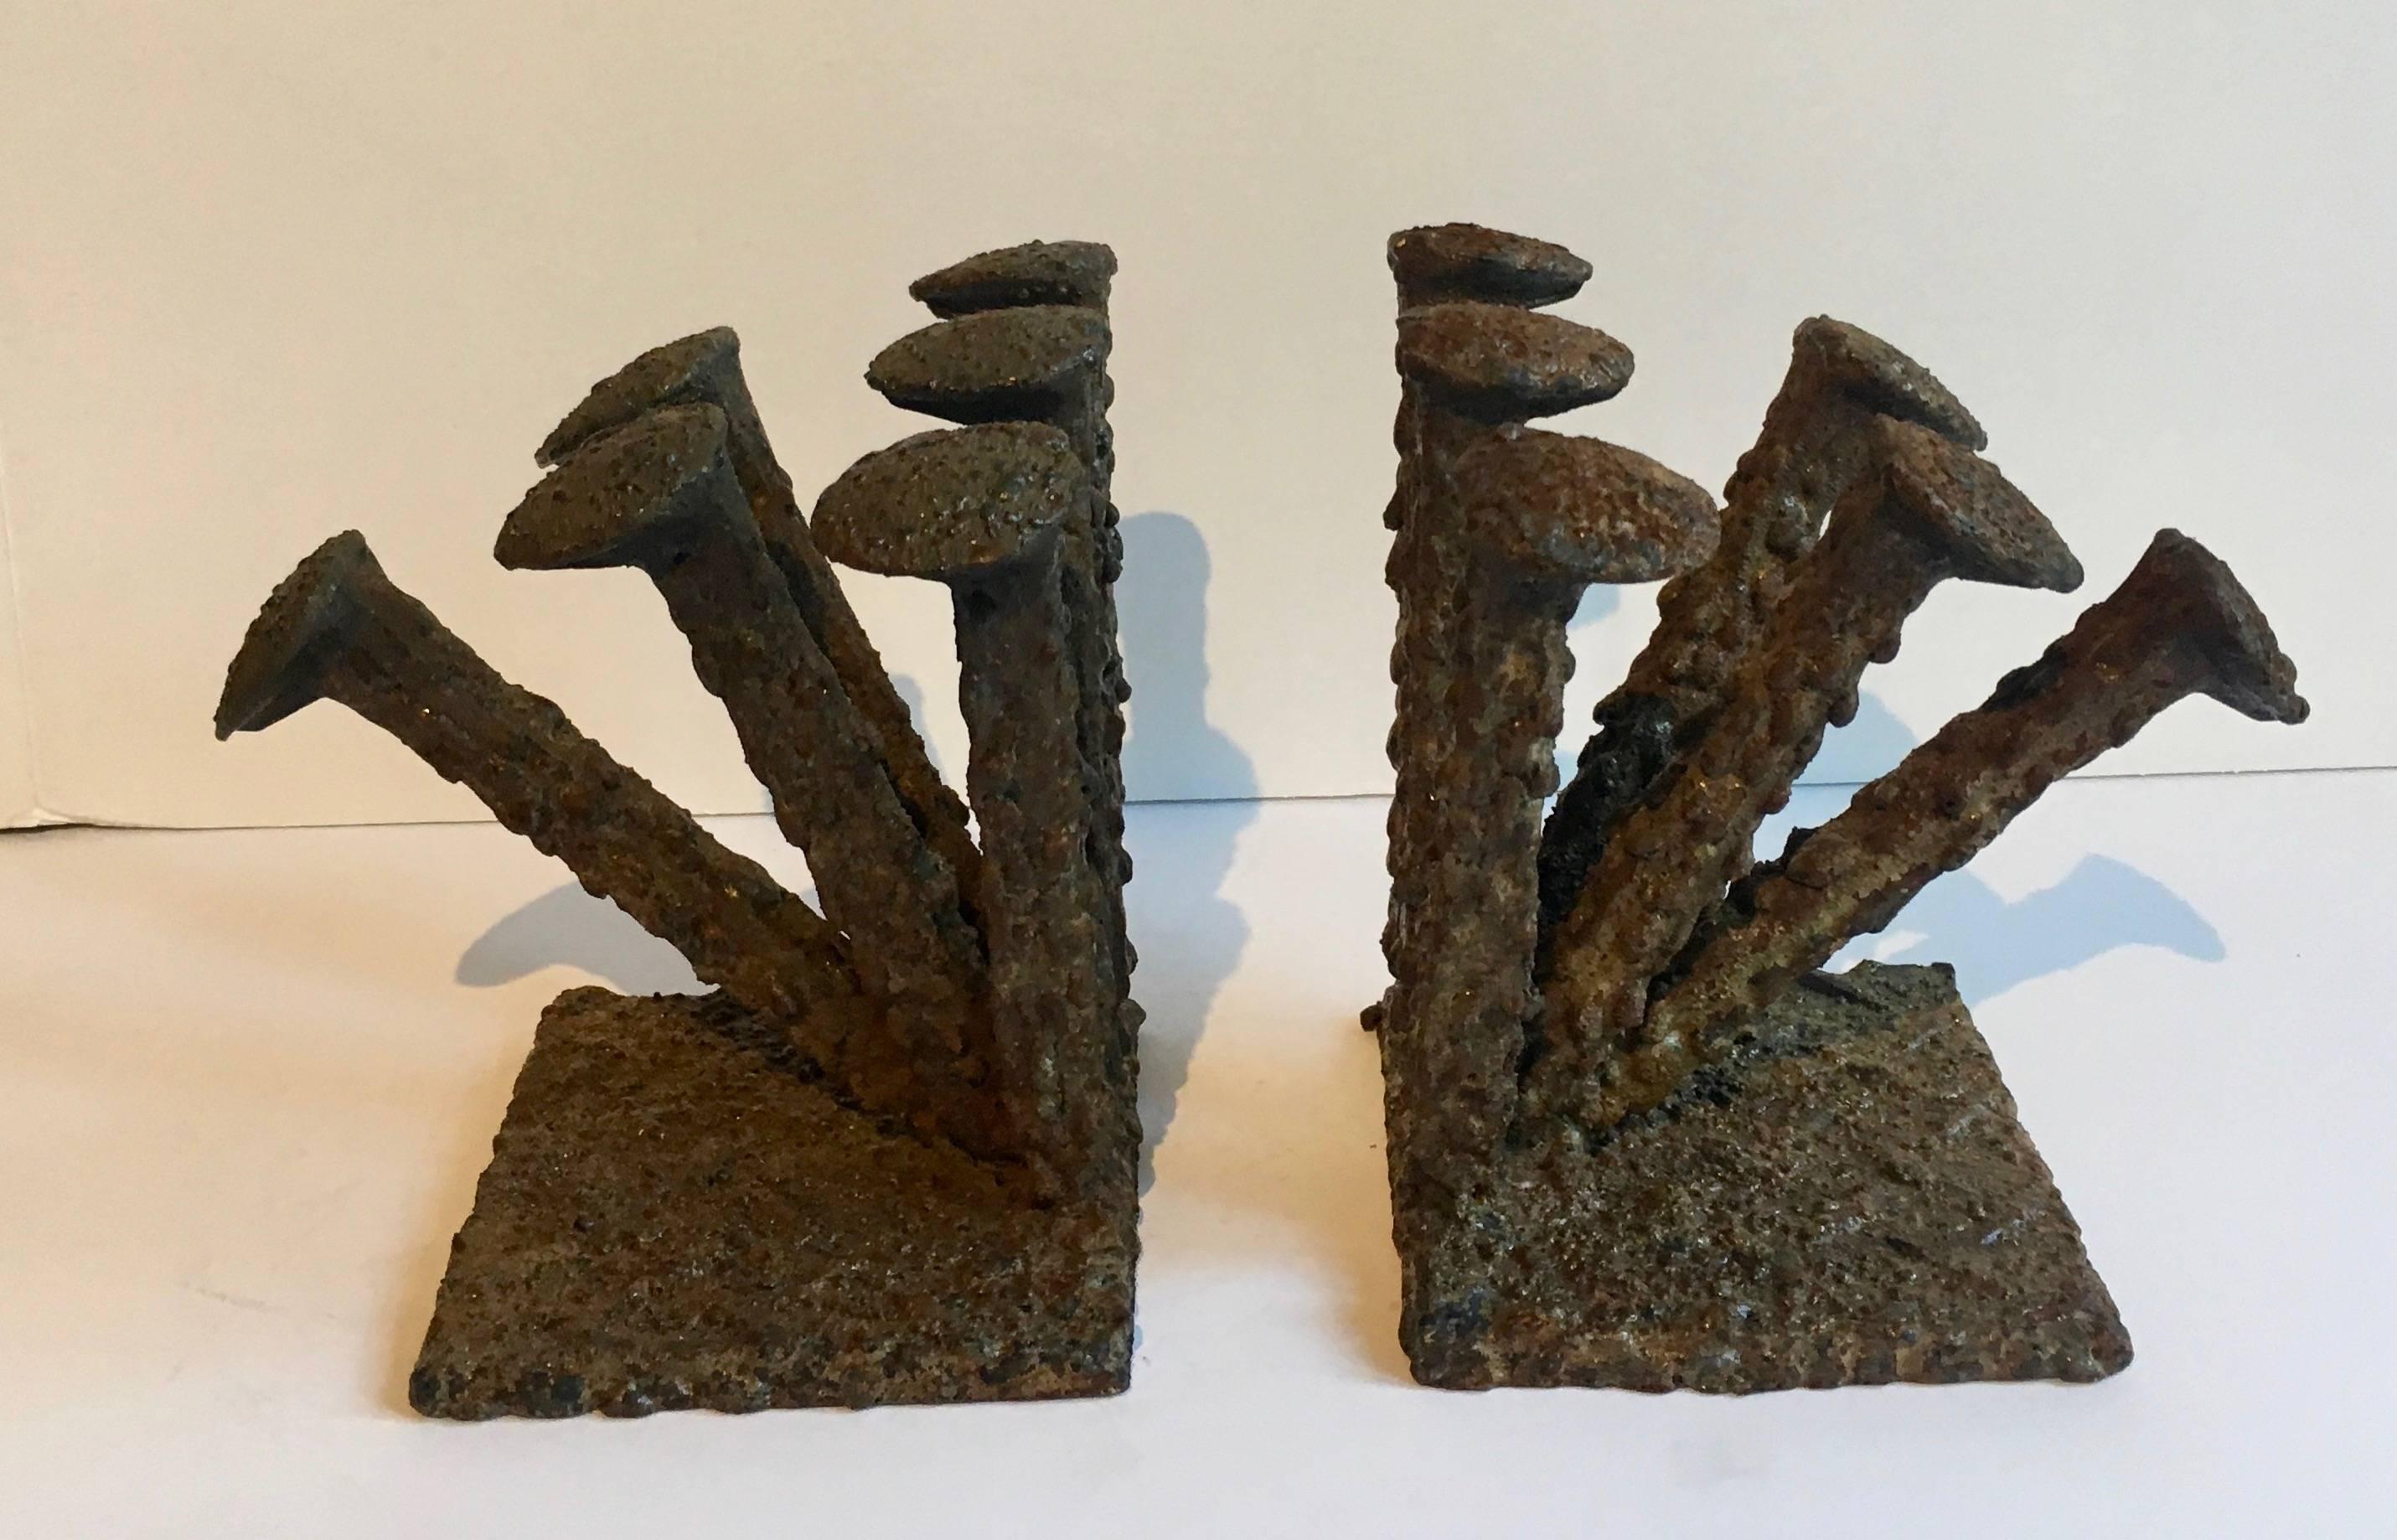 Folk Art Brutalist bookends - a fantastic example of Brutalist style. The bookends can be turned two different ways and still grab your attention. Very unique and heavy, the pair can hold books of size and weight.